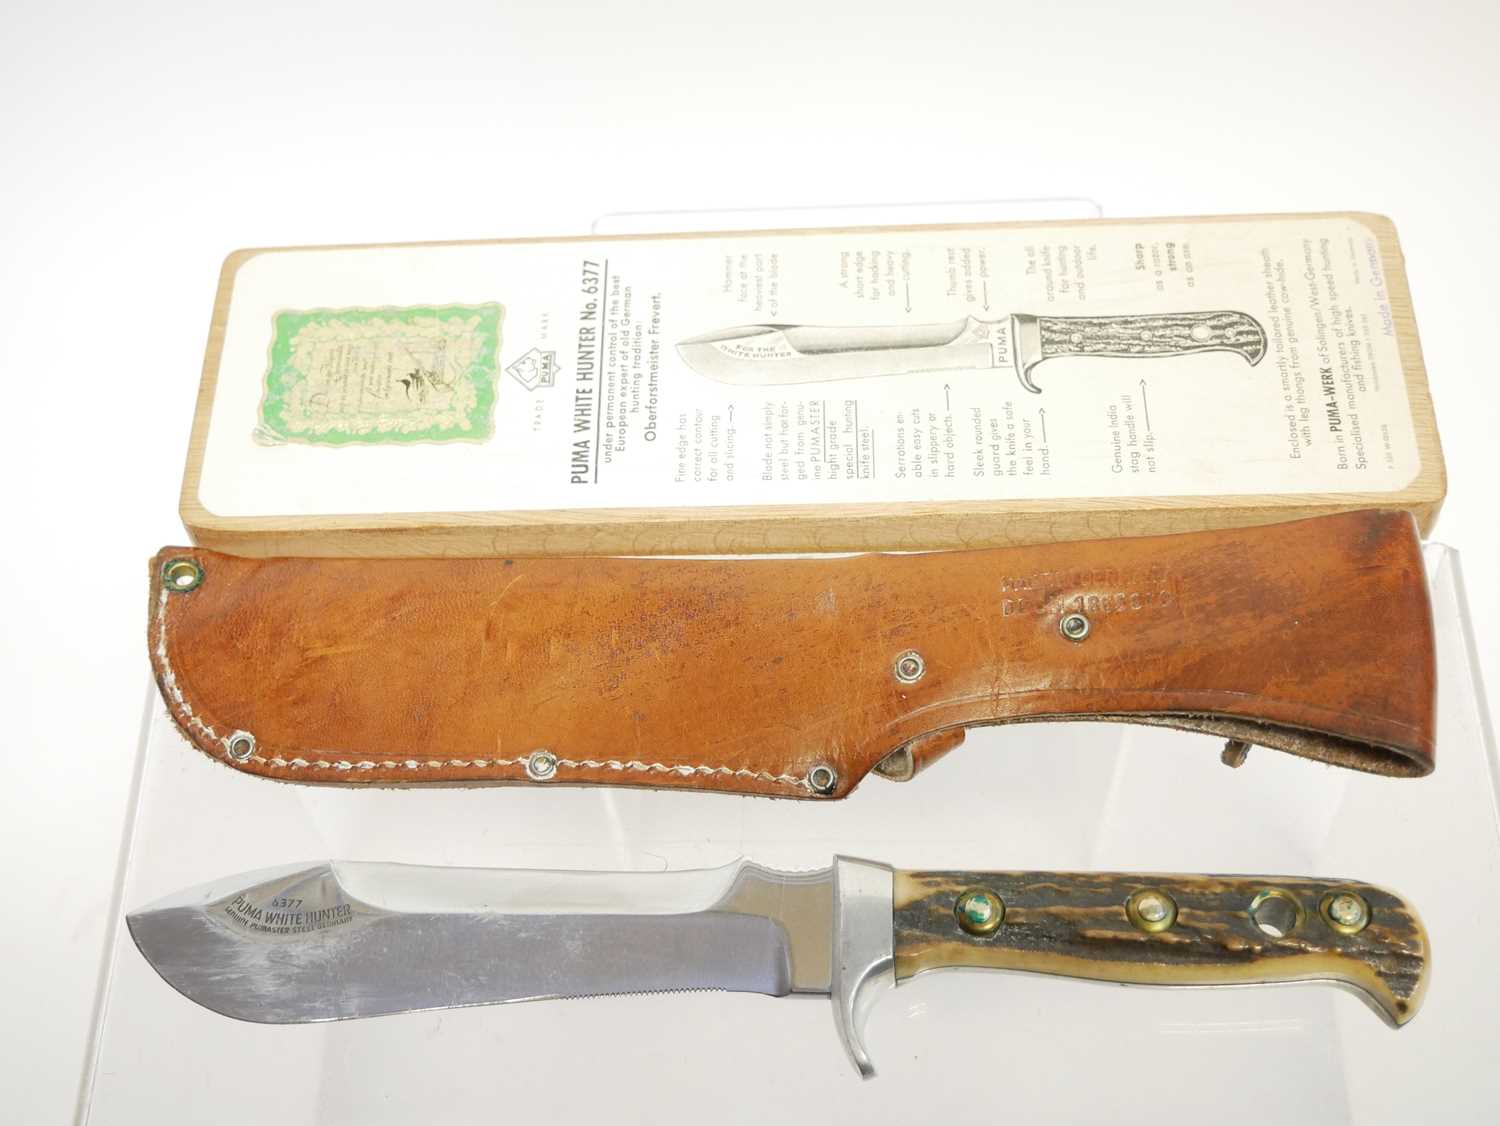 Puma White Hunter no.6377 knife, 6 inch blade, stag horn grips, with leather sheath and box. Buyer - Image 5 of 6